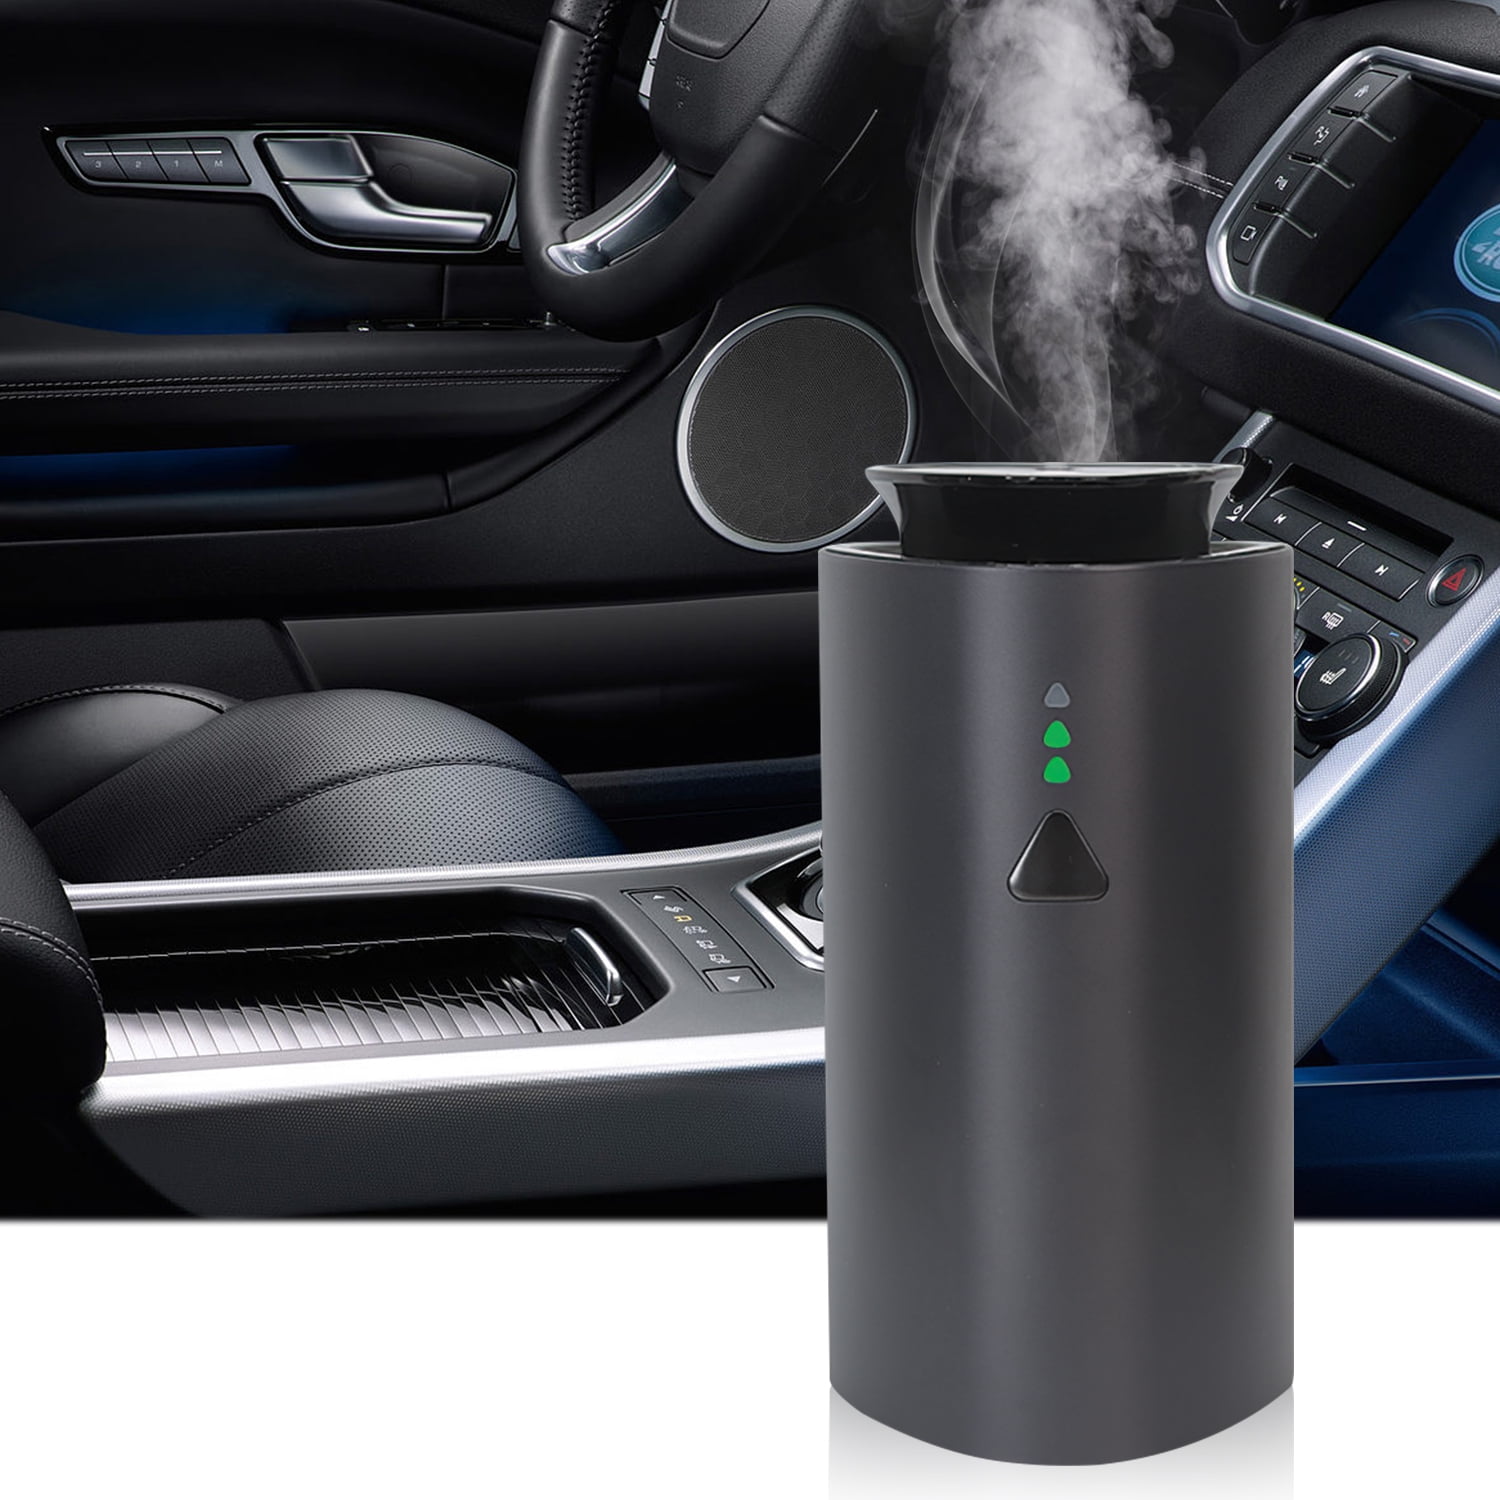 Vyaime Car Diffuser Humidifier Essential Oil Aromatherapy